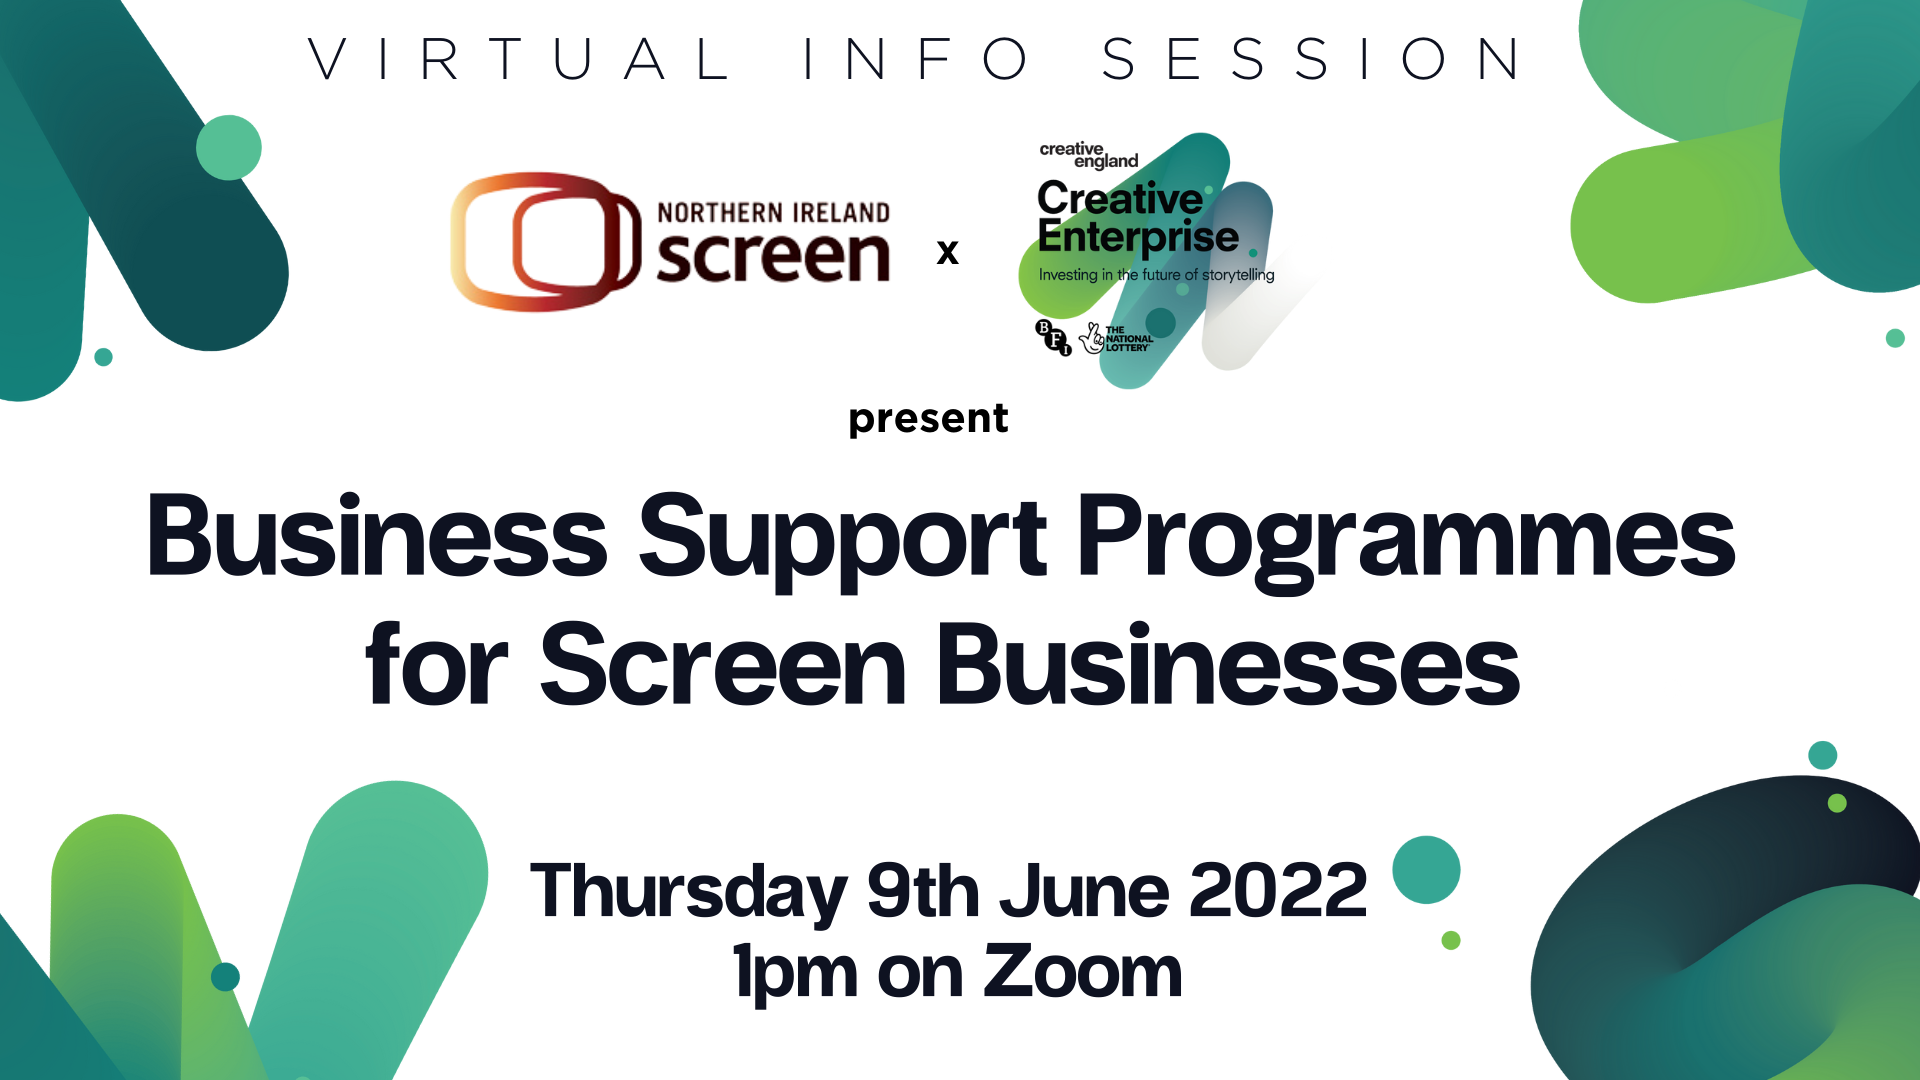 Northern Ireland Screen x Creative Enterprise present Business Support Programmes for Screen Businesses (Info Session)